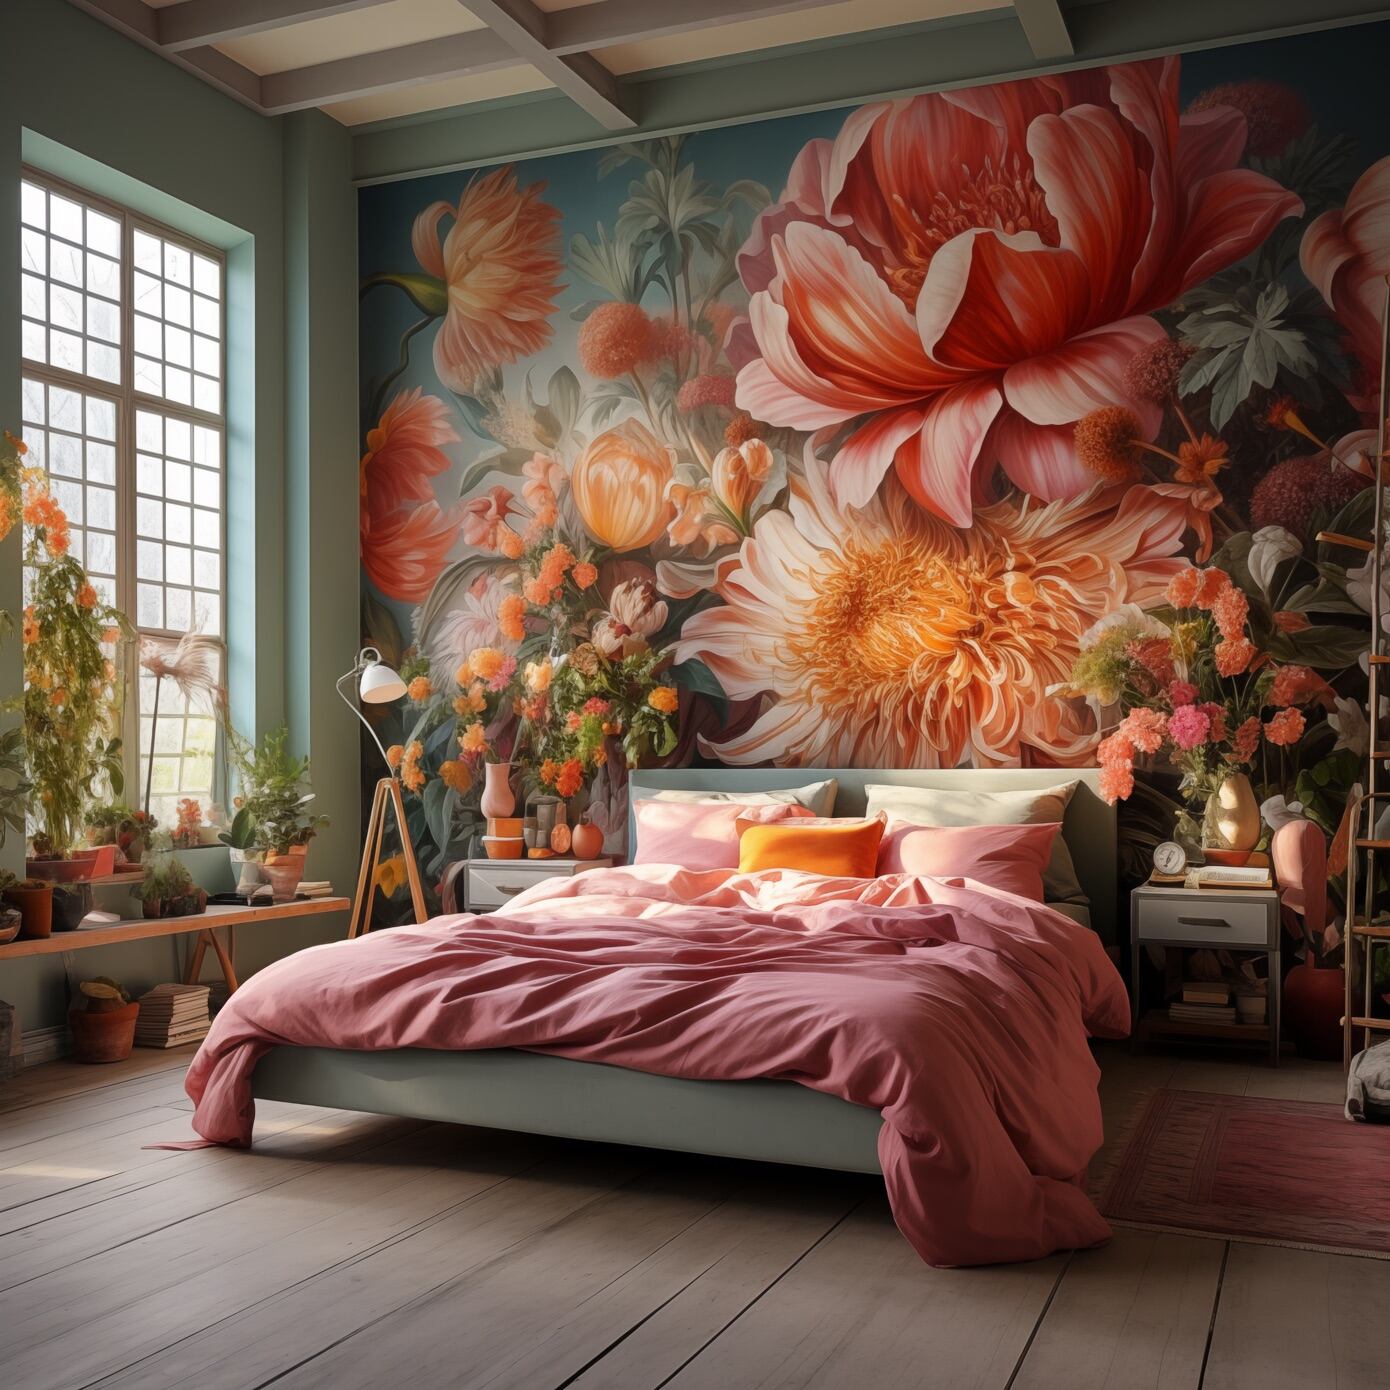 Elevate Your Home Decor with Trending Wall Murals